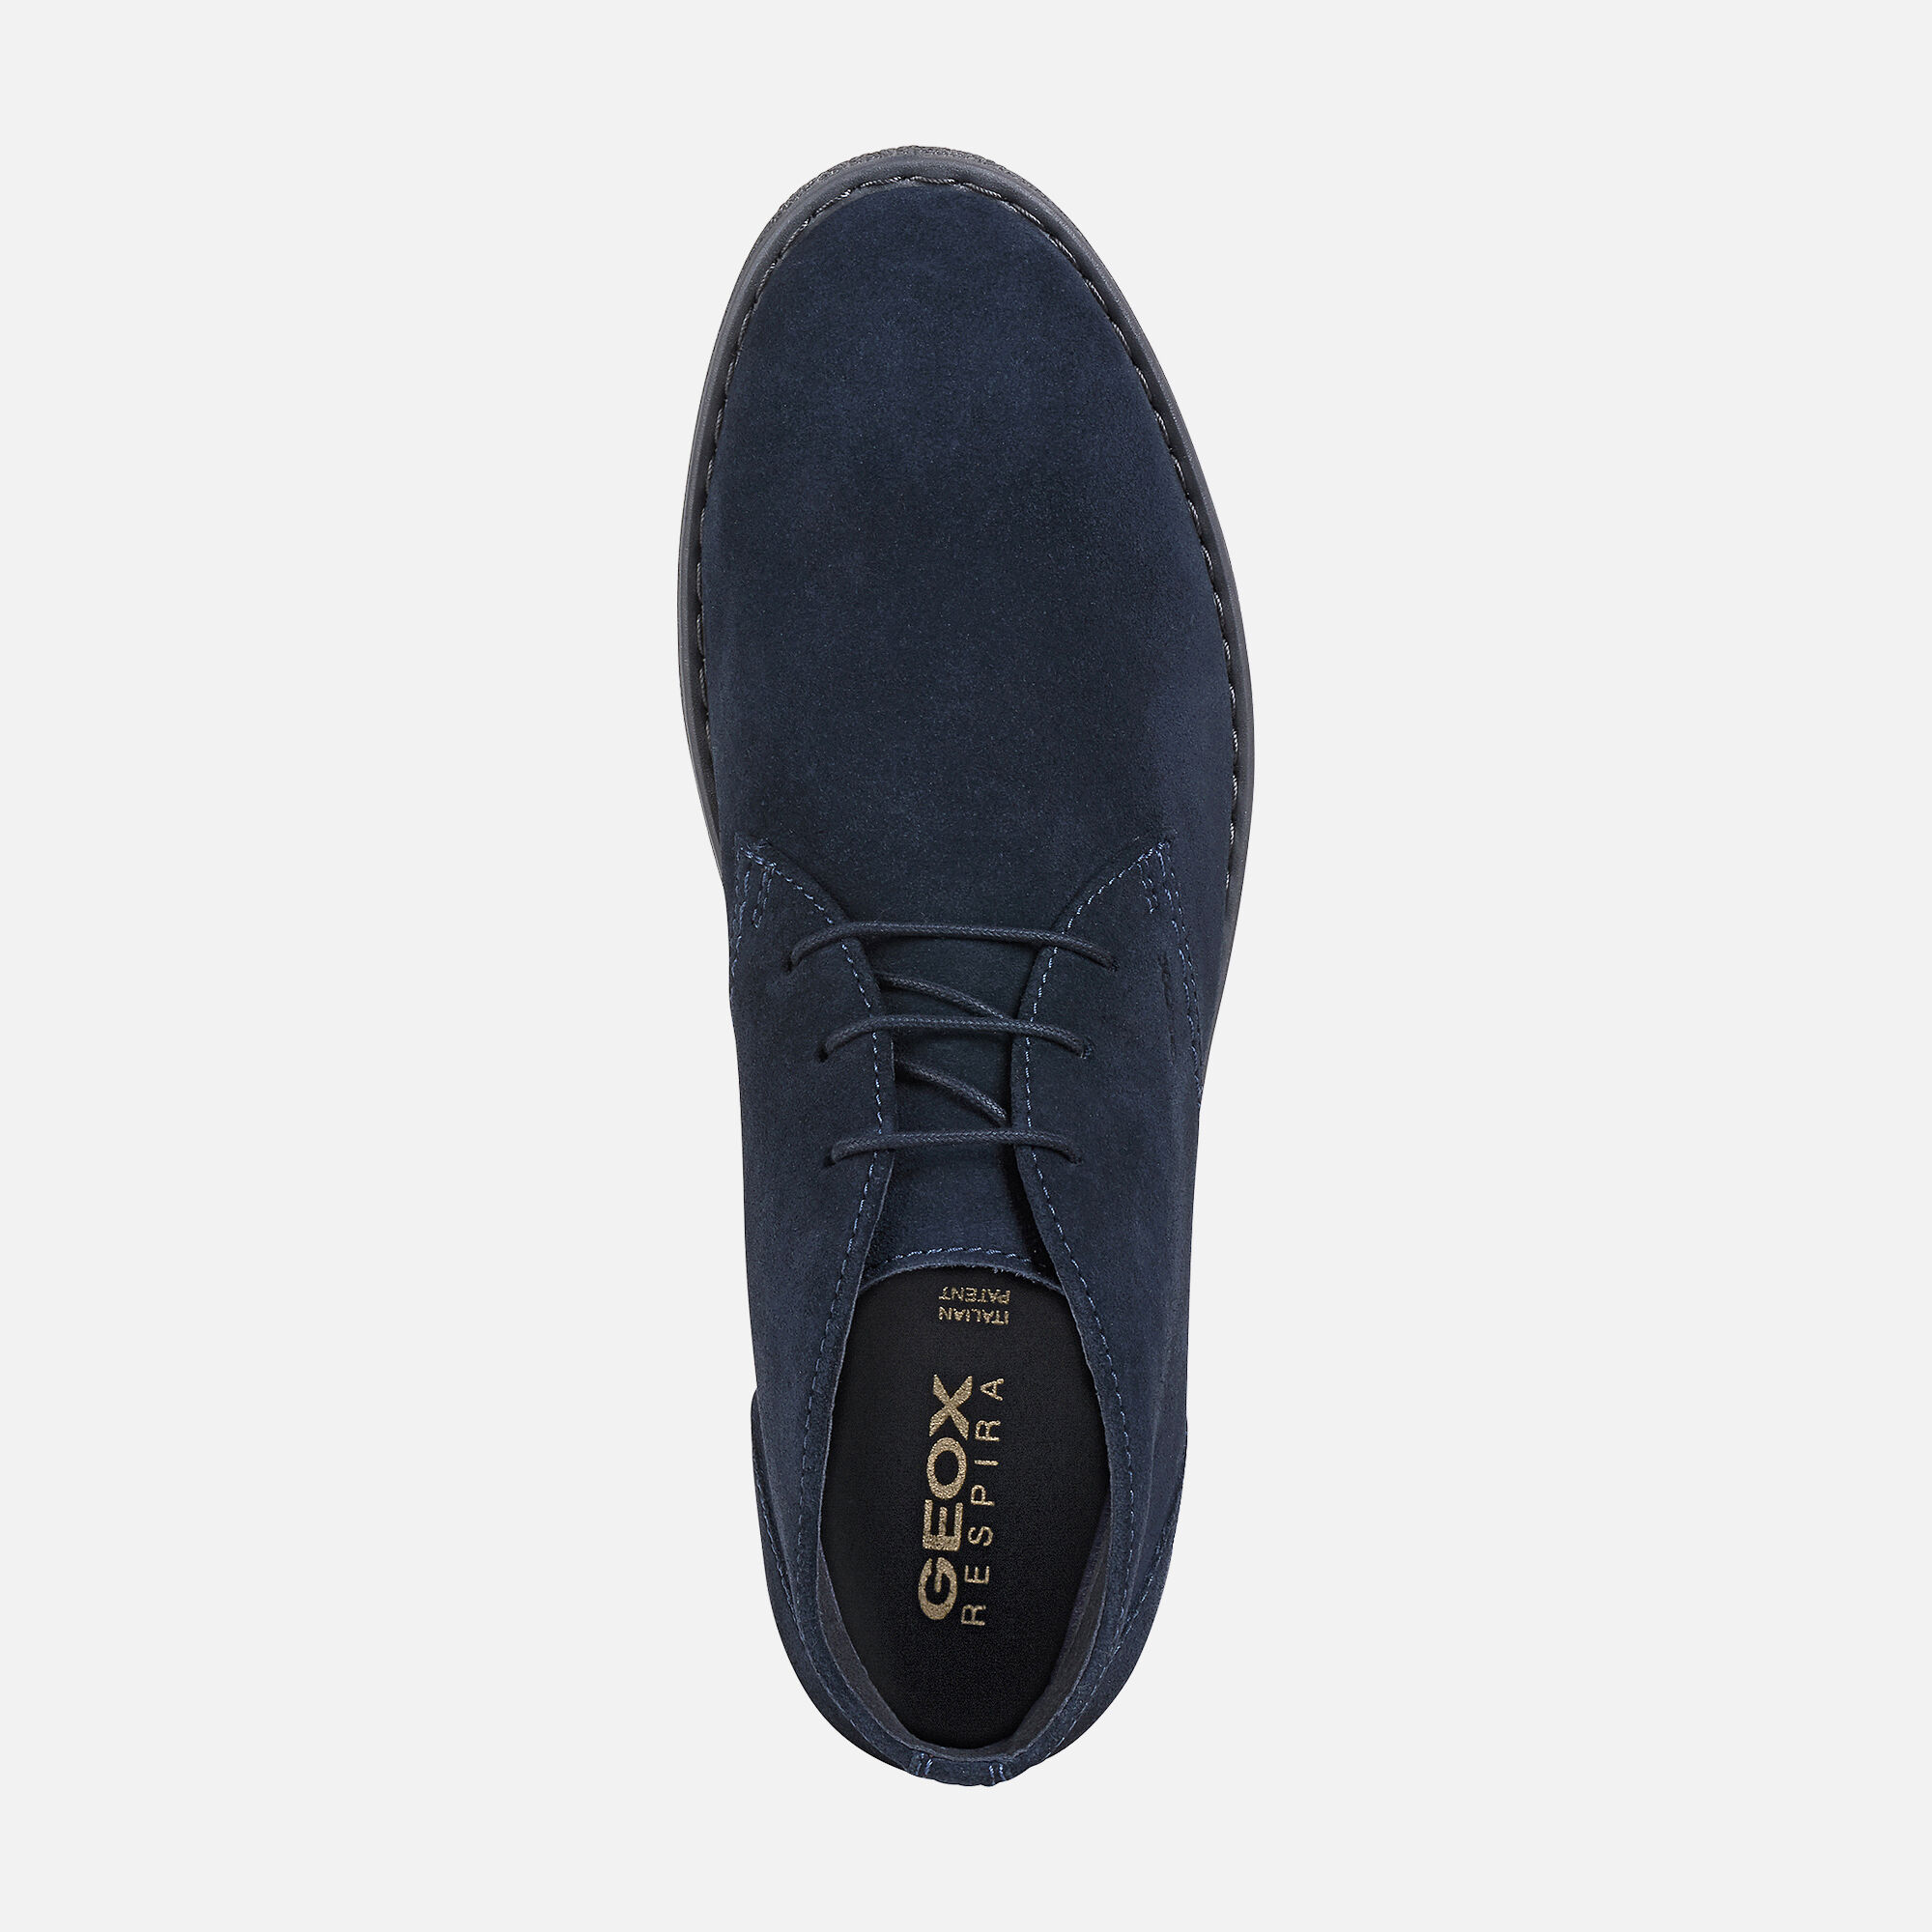 geox blue shoes